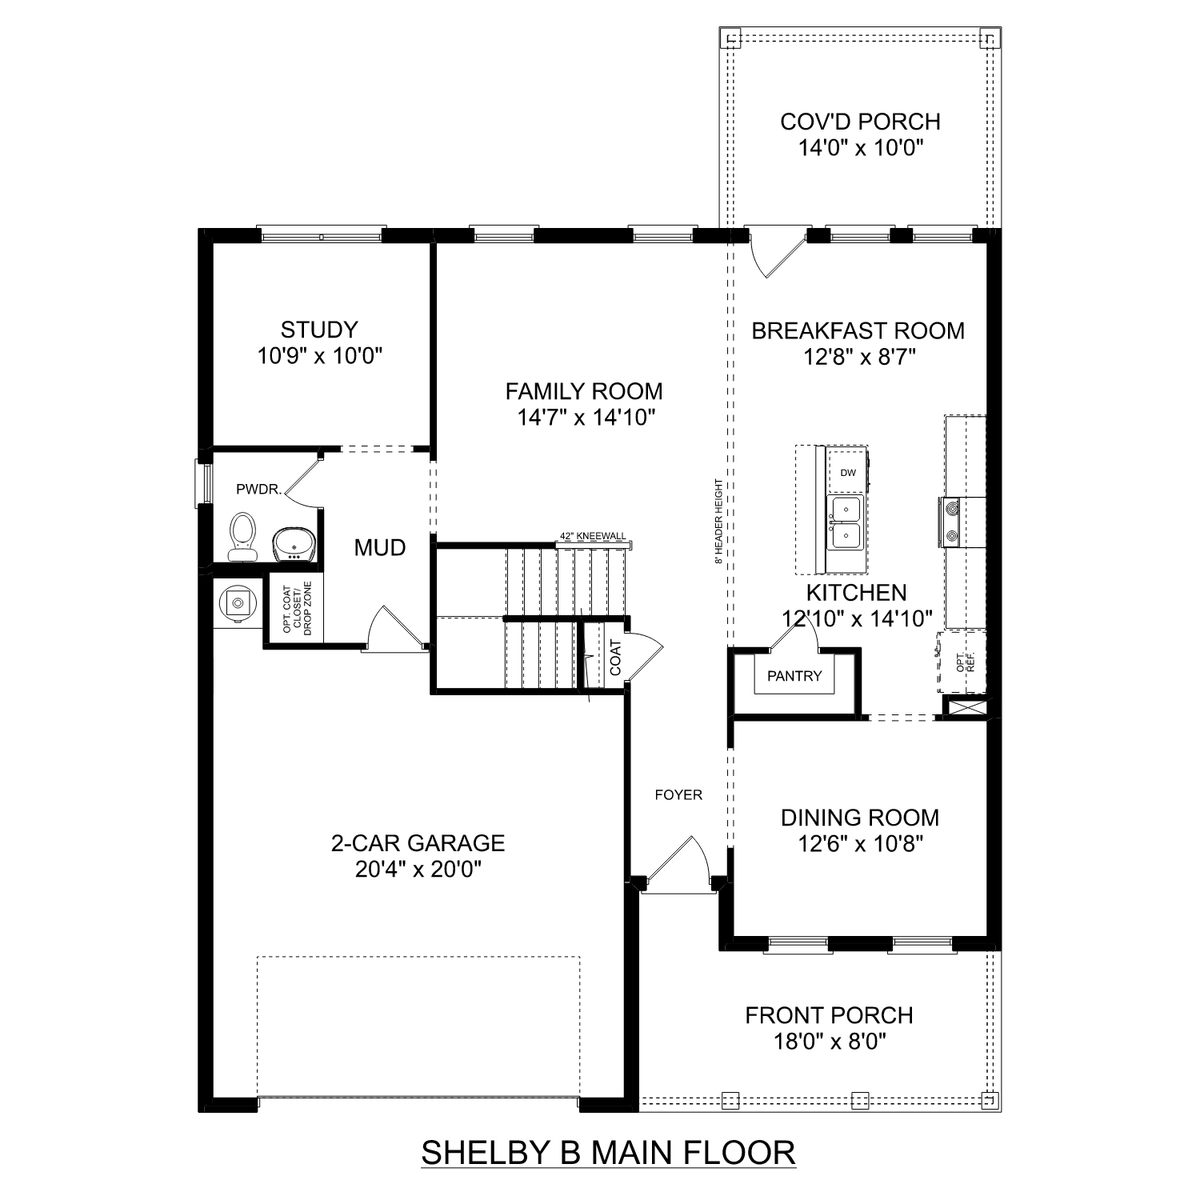 1 - The Shelby B floor plan layout for 9240 Current Way in Davidson Homes' Watts Glen community.